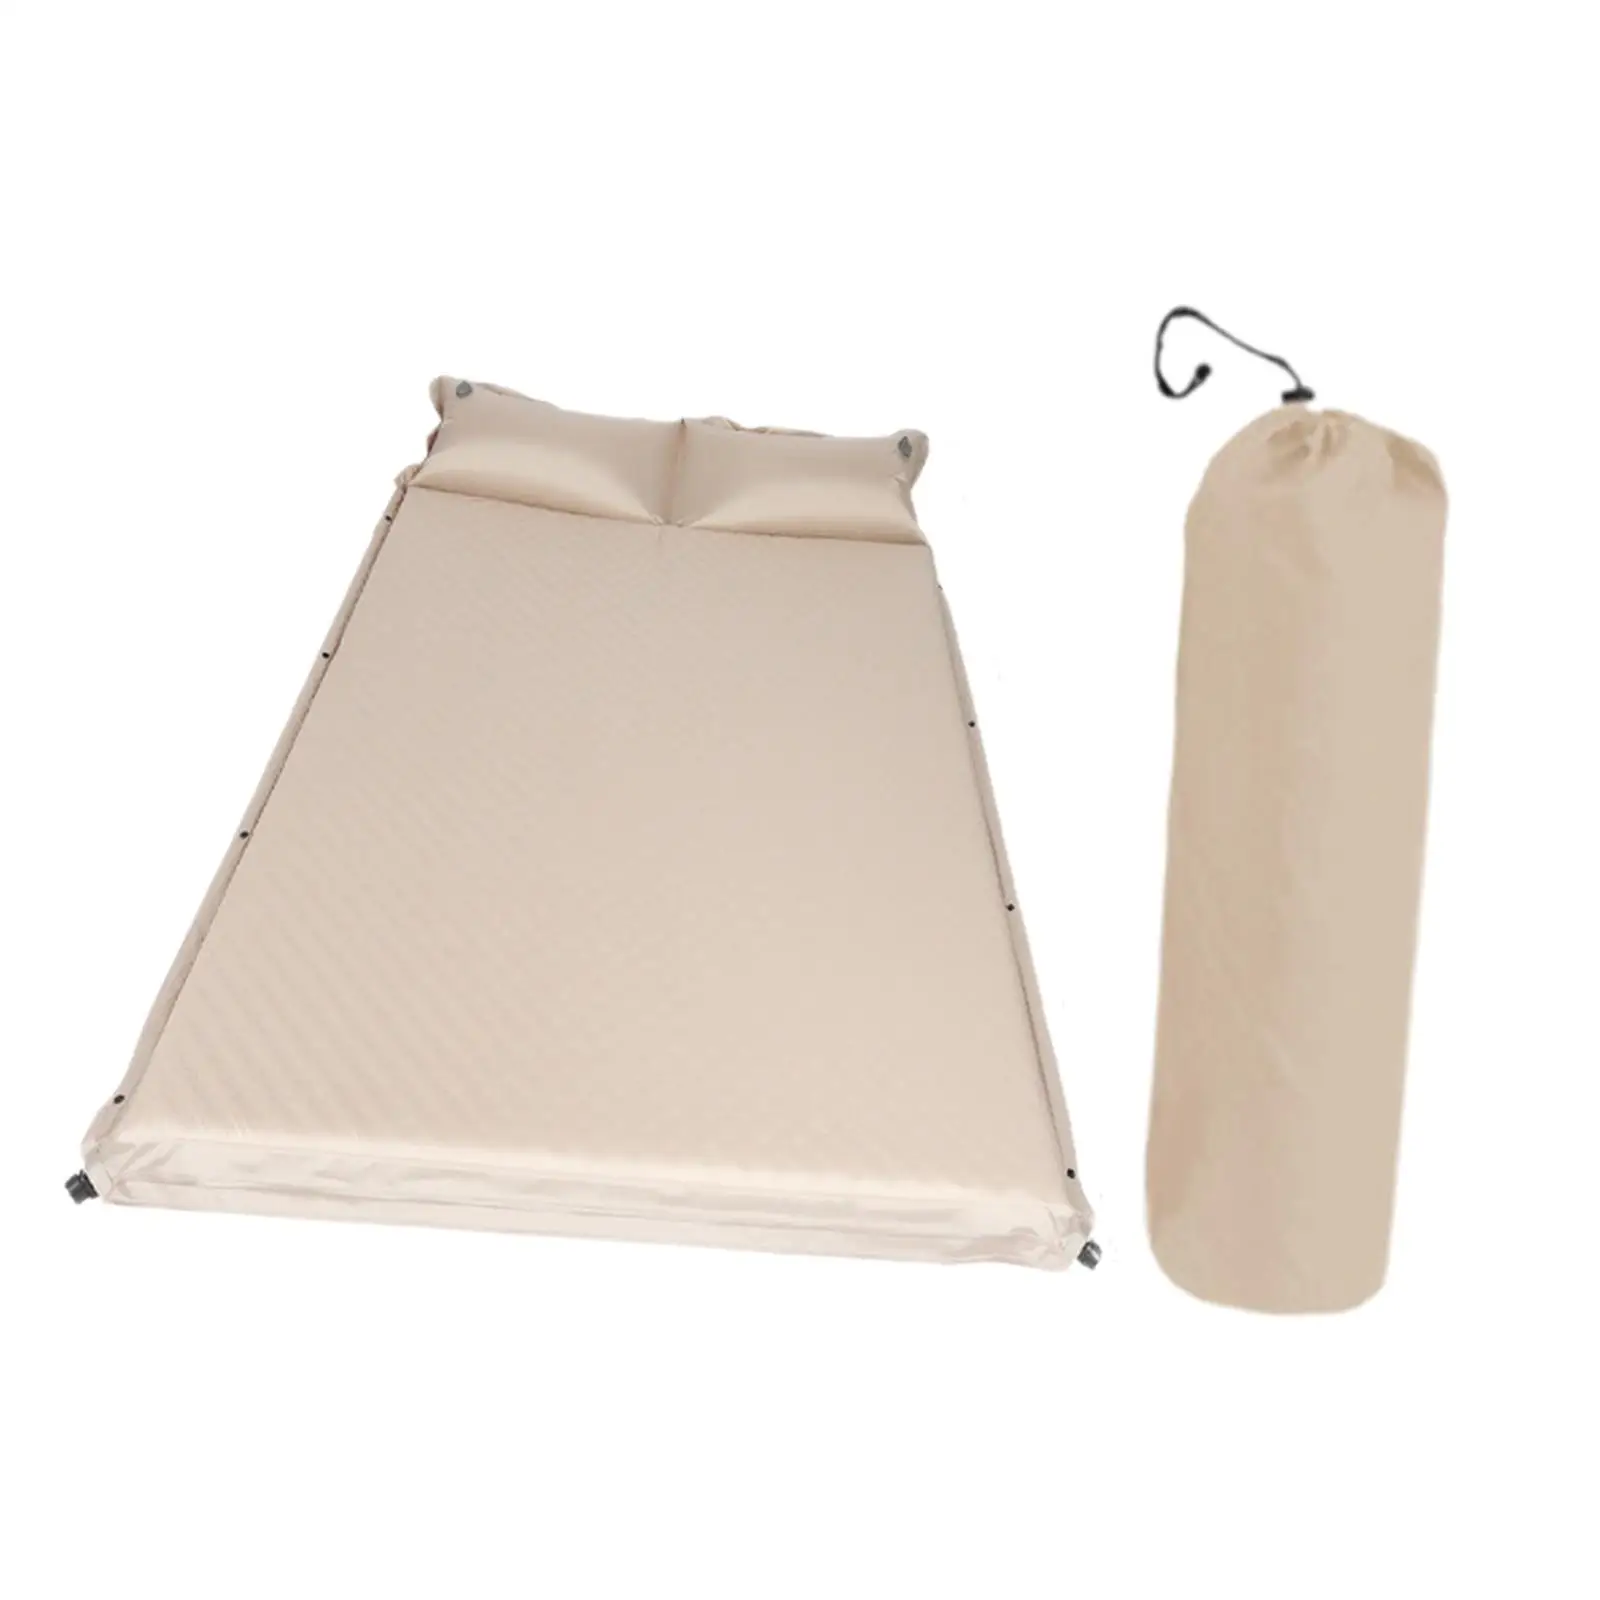 Automatic Inflatable Mattress Camping Mat Cushion Ultralight Self Inflating Air Mattress for Hiking Outdoor Travel Picnic Tent